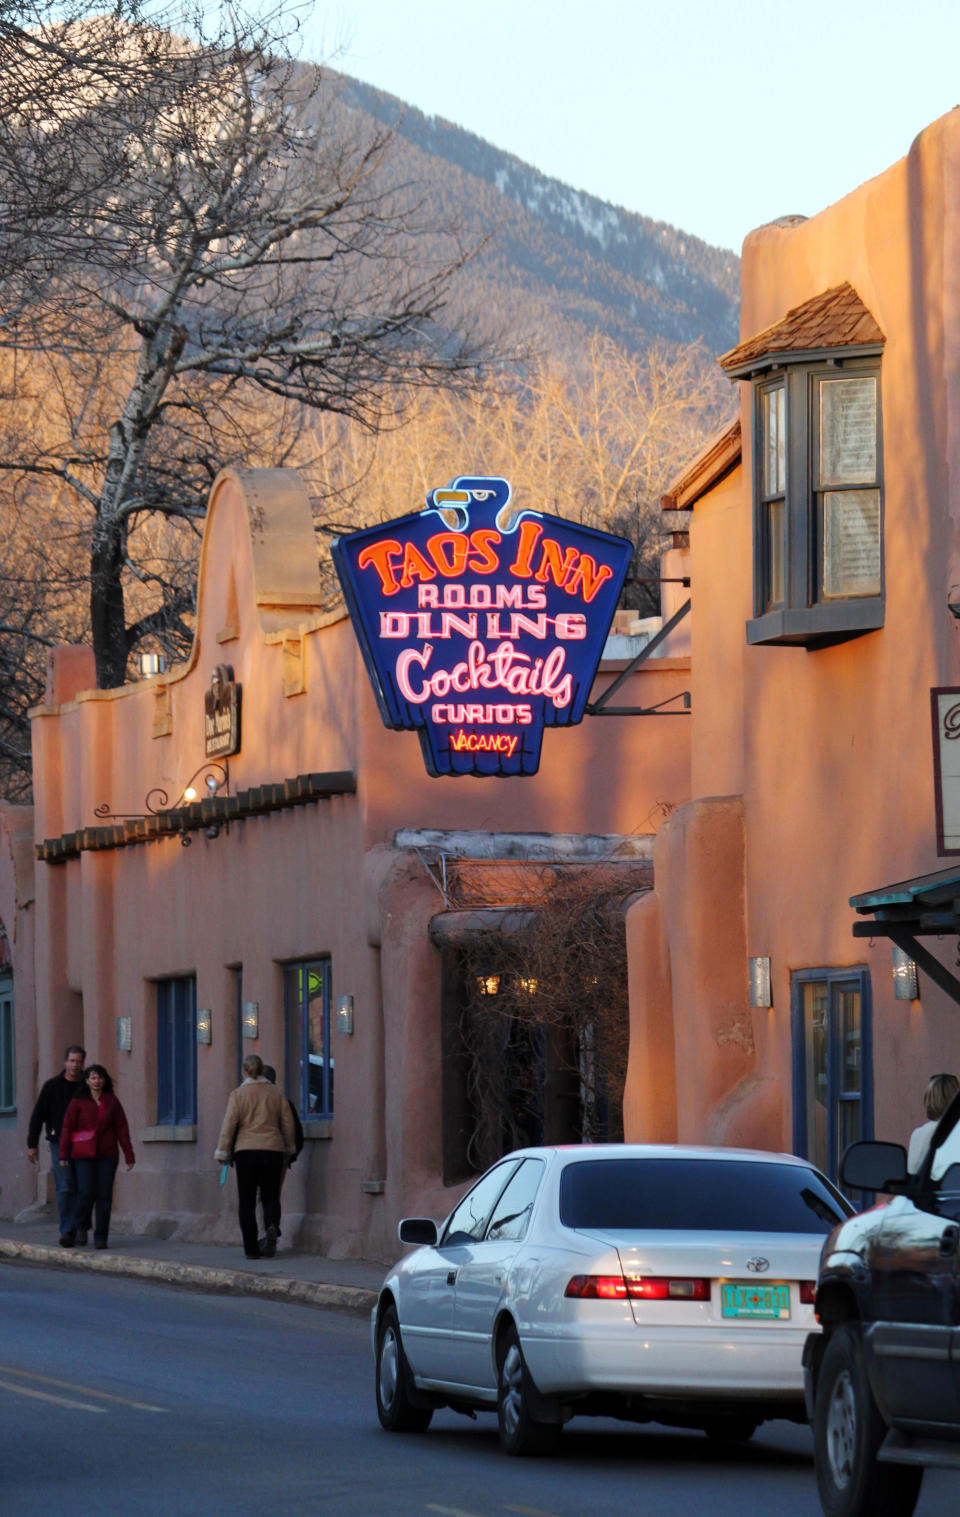 This Feb. 25, 2012 image shows the neon sign in front of the historic Taos Inn along the main street in Taos, N.M. The inn was opened by entrepreneur and artist Helen Martin after the death of her husband in the 1930s. Taos is embarking on a yearlong celebration aimed at recognizing its remarkable women through art exhibits, film screenings, lectures, tours and outdoor excursions. (AP Photo/Susan Montoya Bryan)